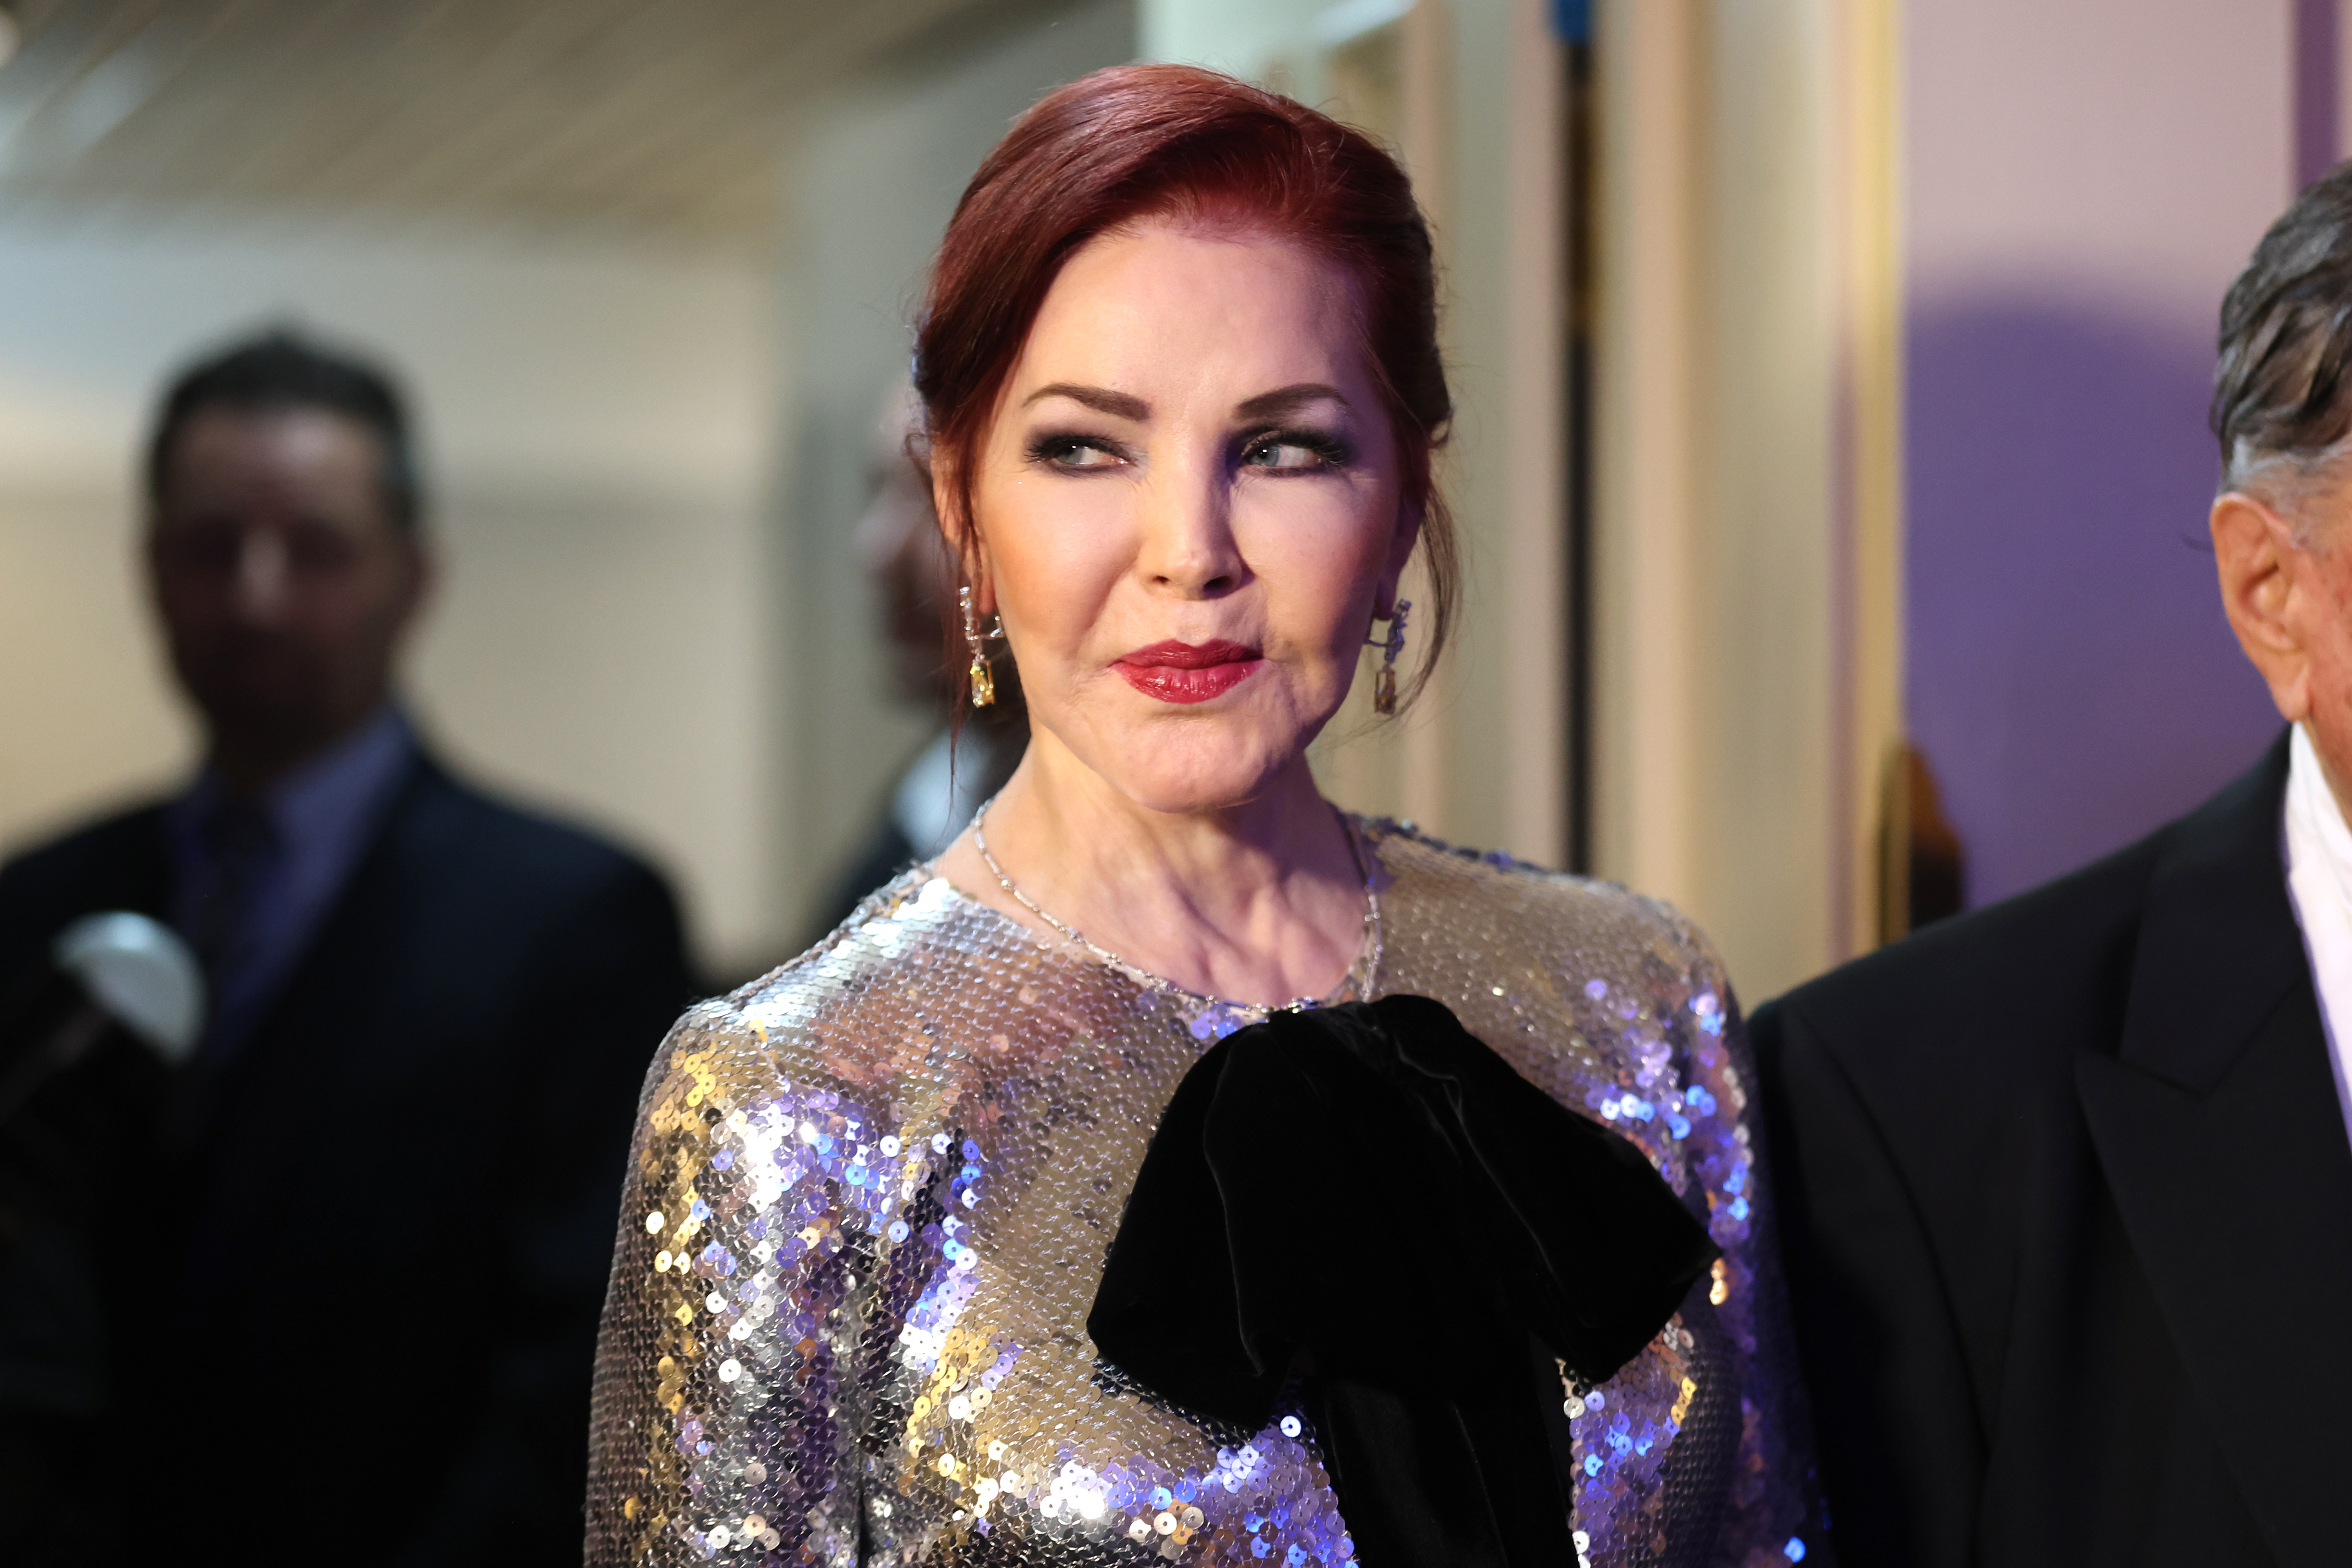 Priscilla Presley during the Vienna Opera Ball in Vienna, Austria, on February 8, 2024. | Source: Getty Images